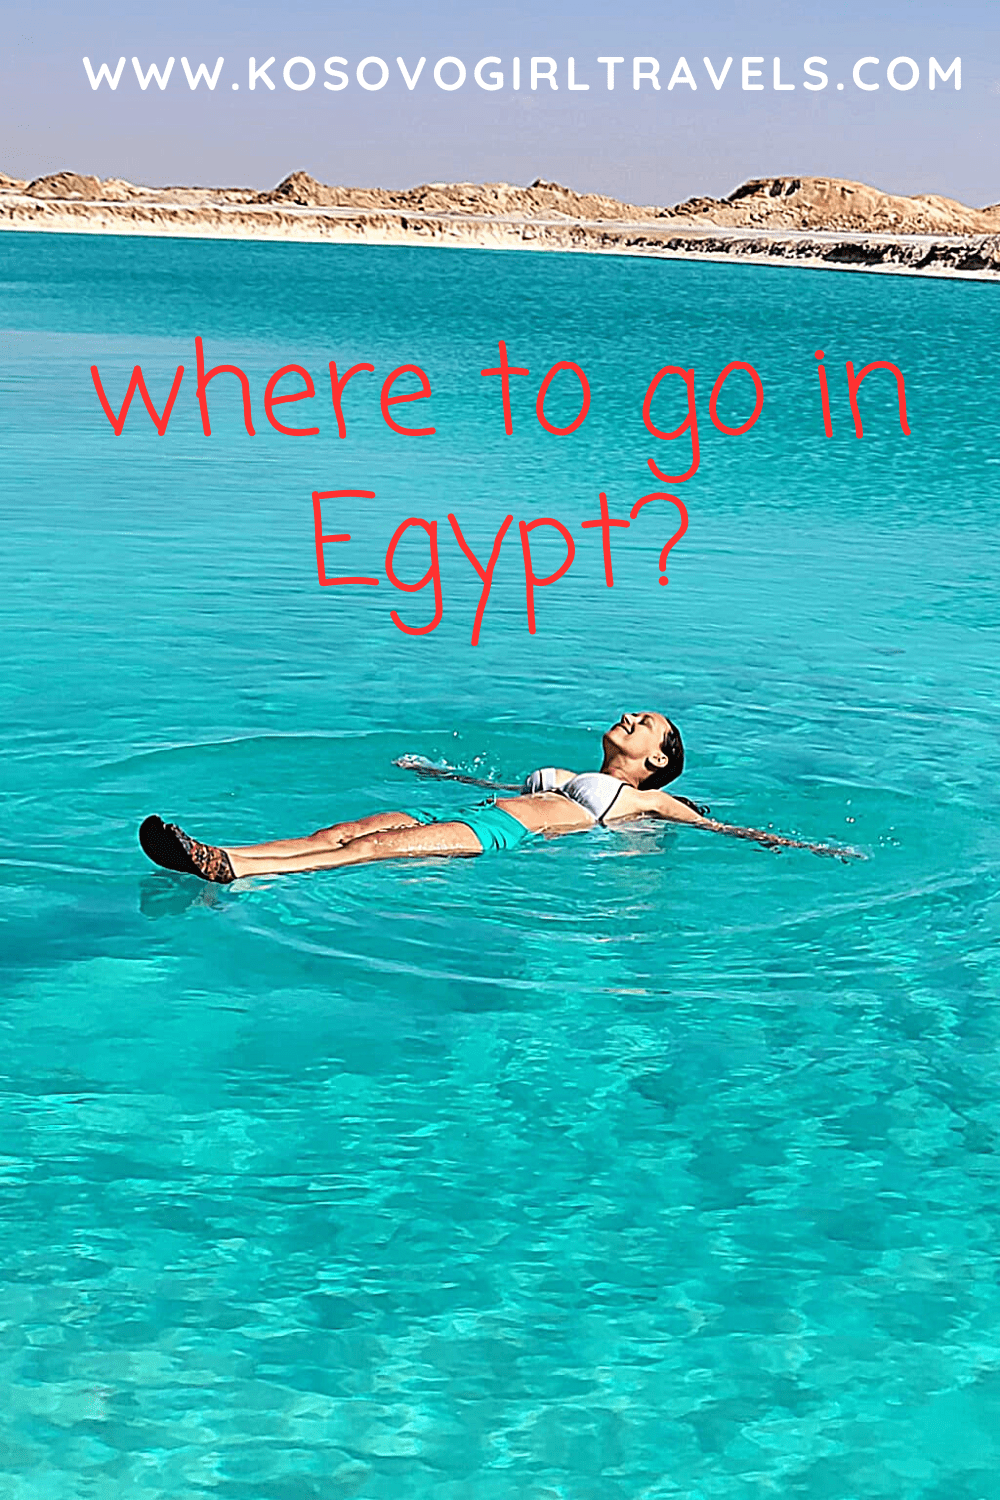 two weeks in Egypt